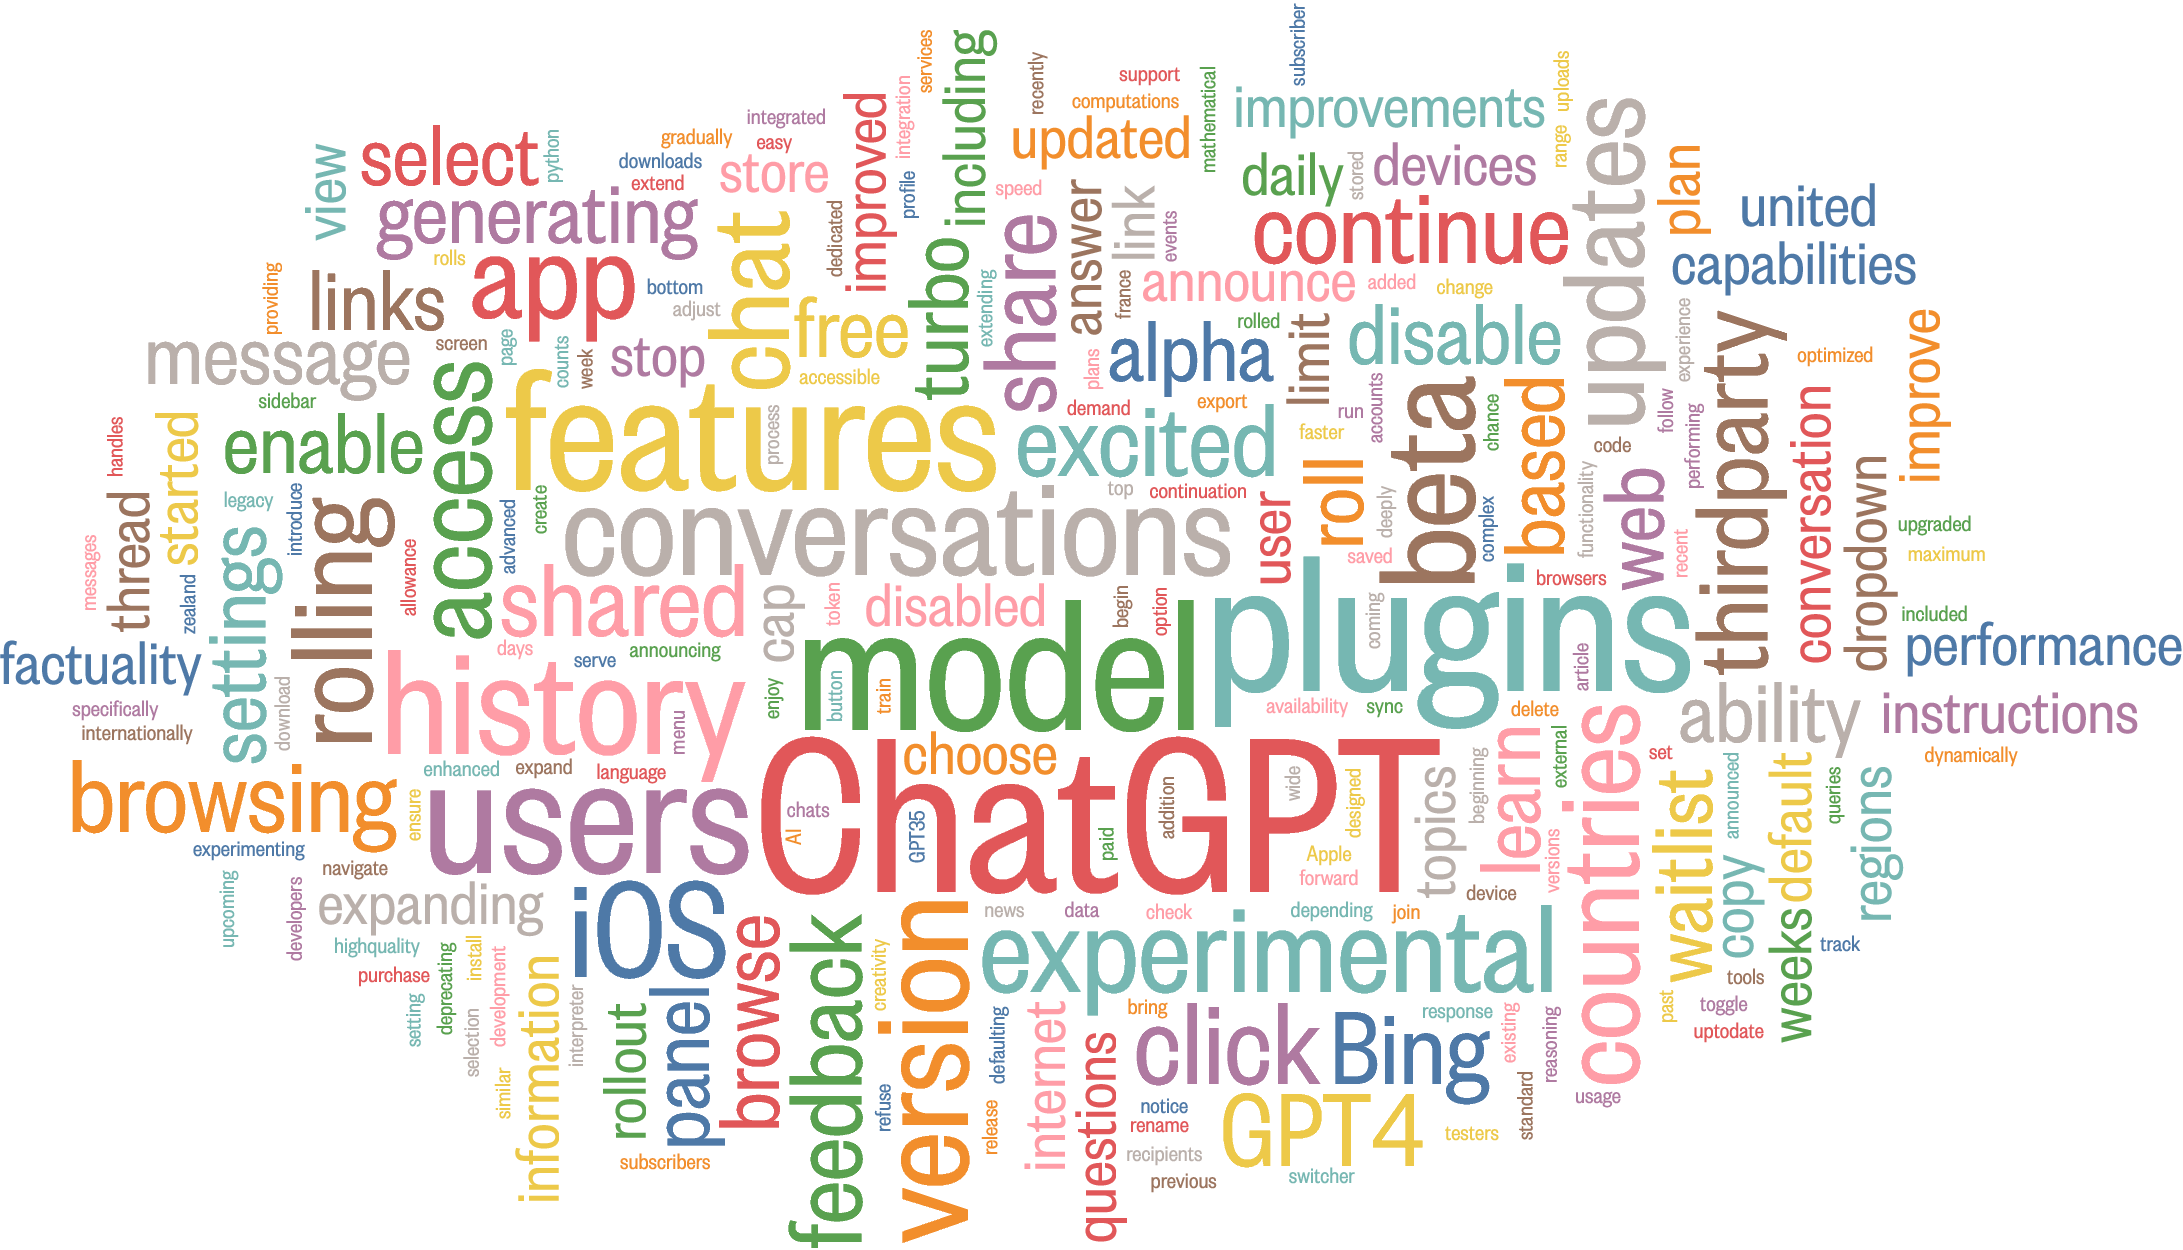 A word cloud visualization for ChatGPT release notes produced by the generator with default parameters. Font: Founders Grotesk Condensed Regular (included with macOS).